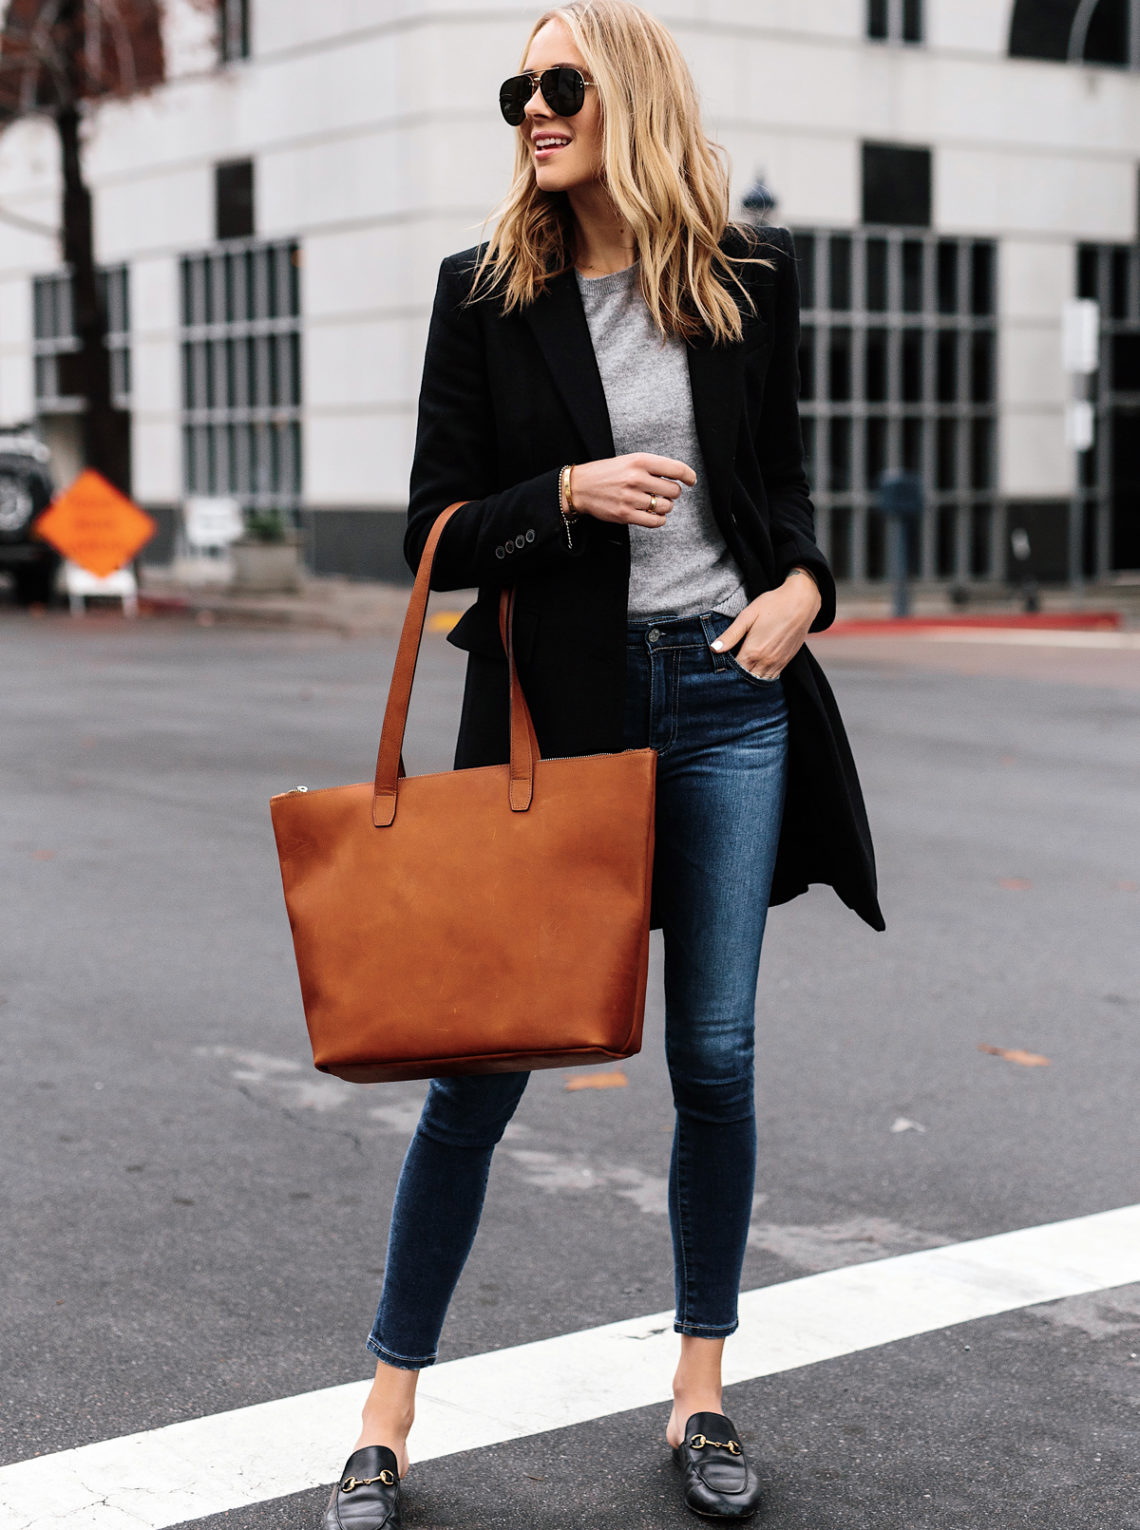 Blonde Woman Wearing SLATE Cognac Tote Black Wool Coat Grey Sweater Denim Skinny Jeans Gucci Mules Outfit Fashion Jackson San Diego Fashion Blogger Street Style